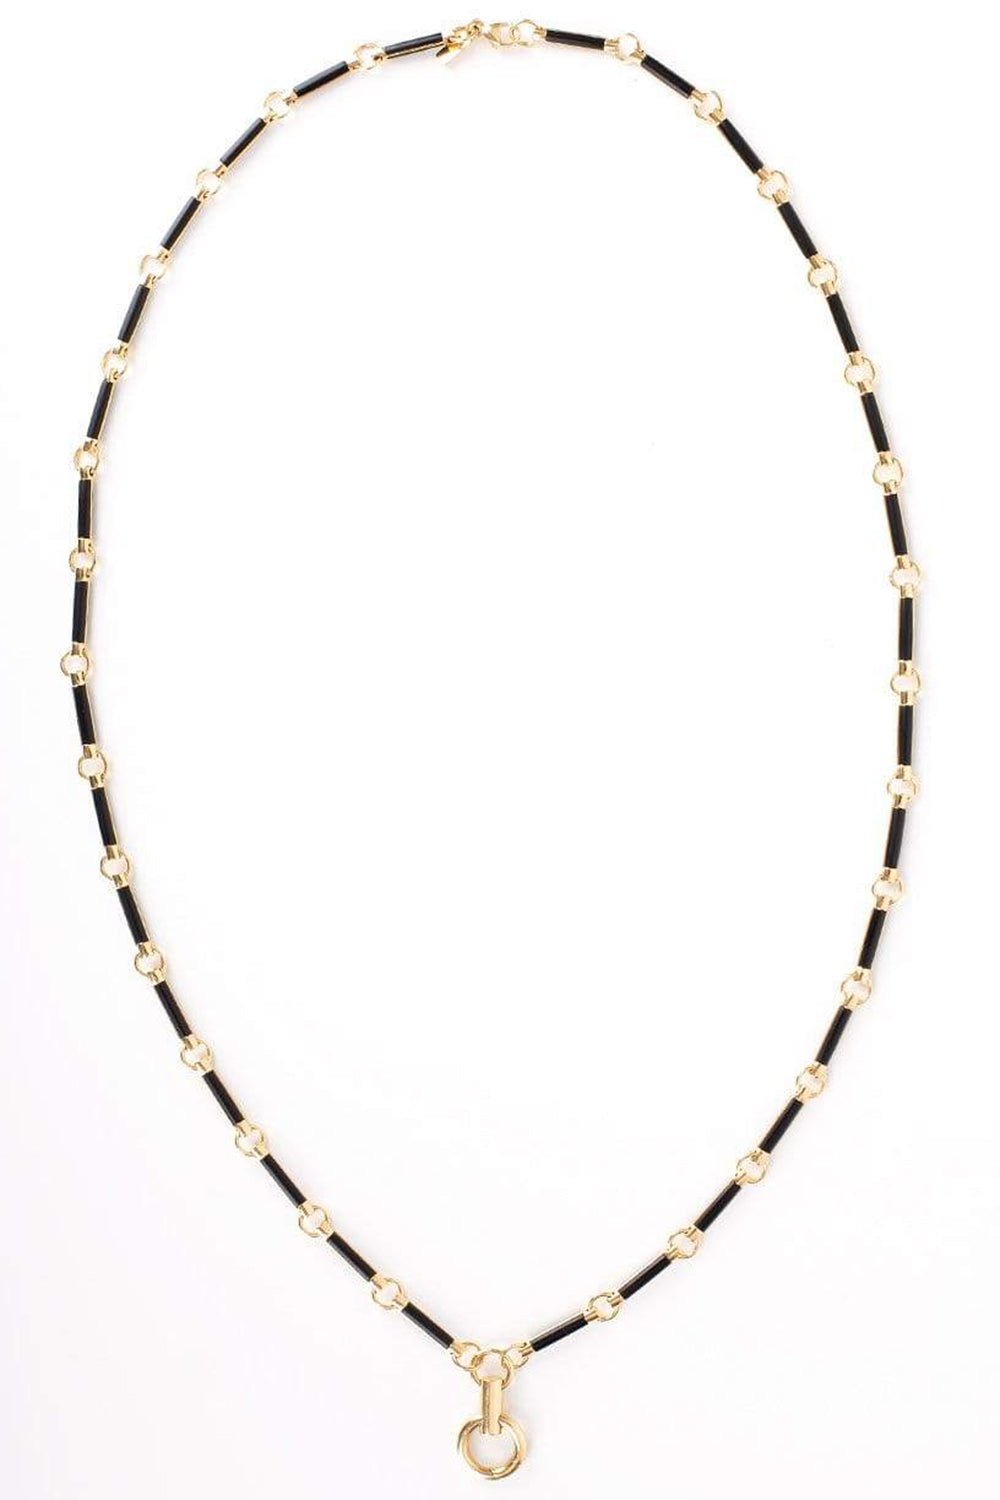 FOUNDRAE-Onyx Element Clock Weight Chain-YELLOW GOLD